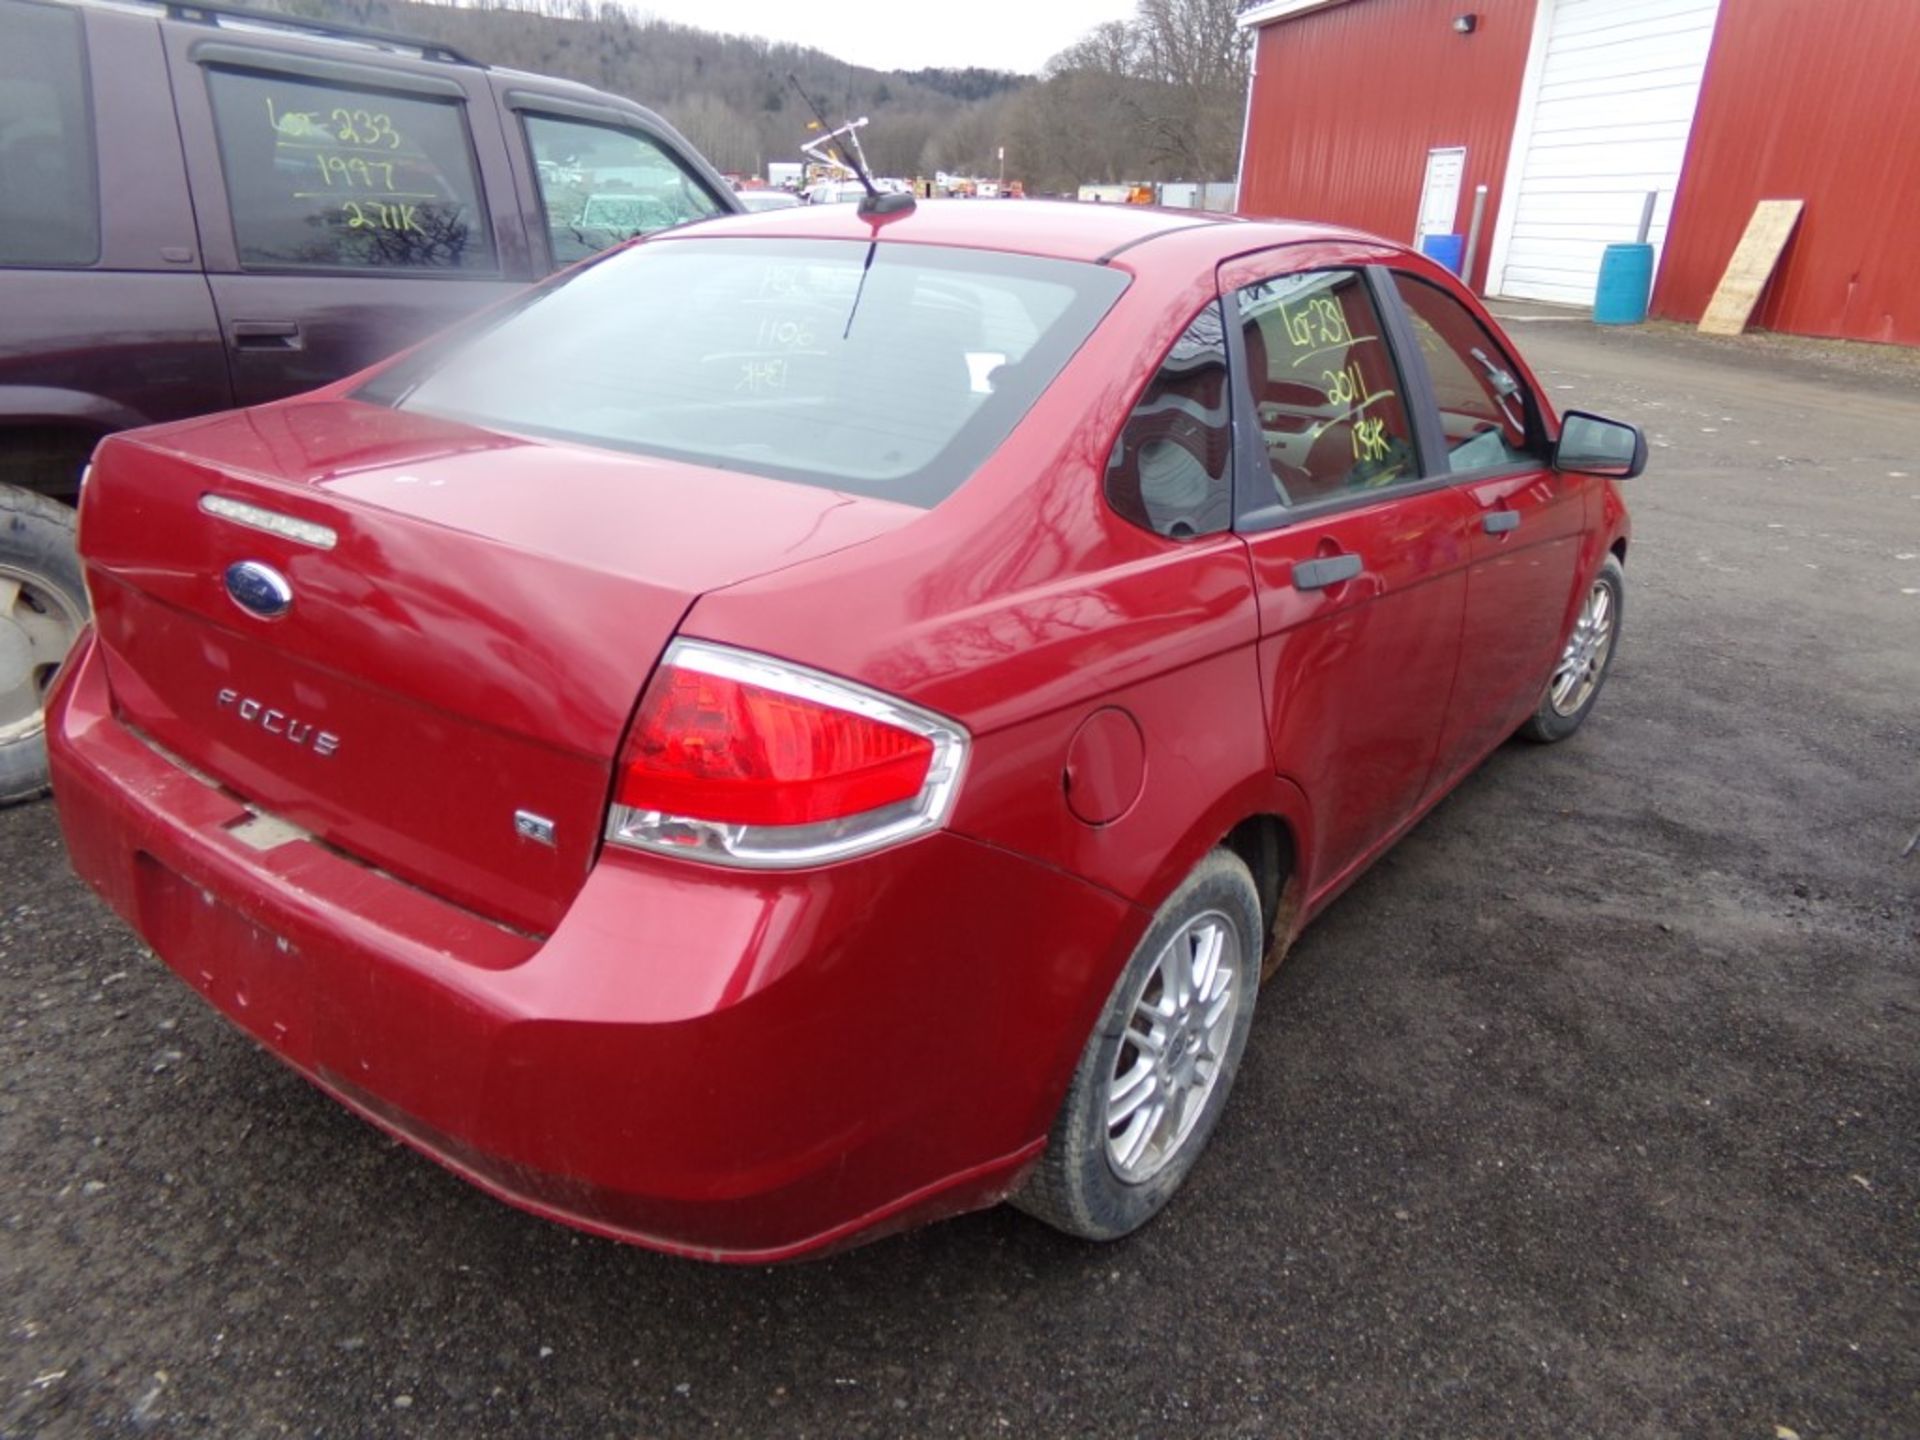 2011 Ford Focus SE, Maroon, 134,714 Miles, VIN#:1FAHP3FNXBW100485 - OPEN TO ALL BUYERS, LOUD - Bild 3 aus 6